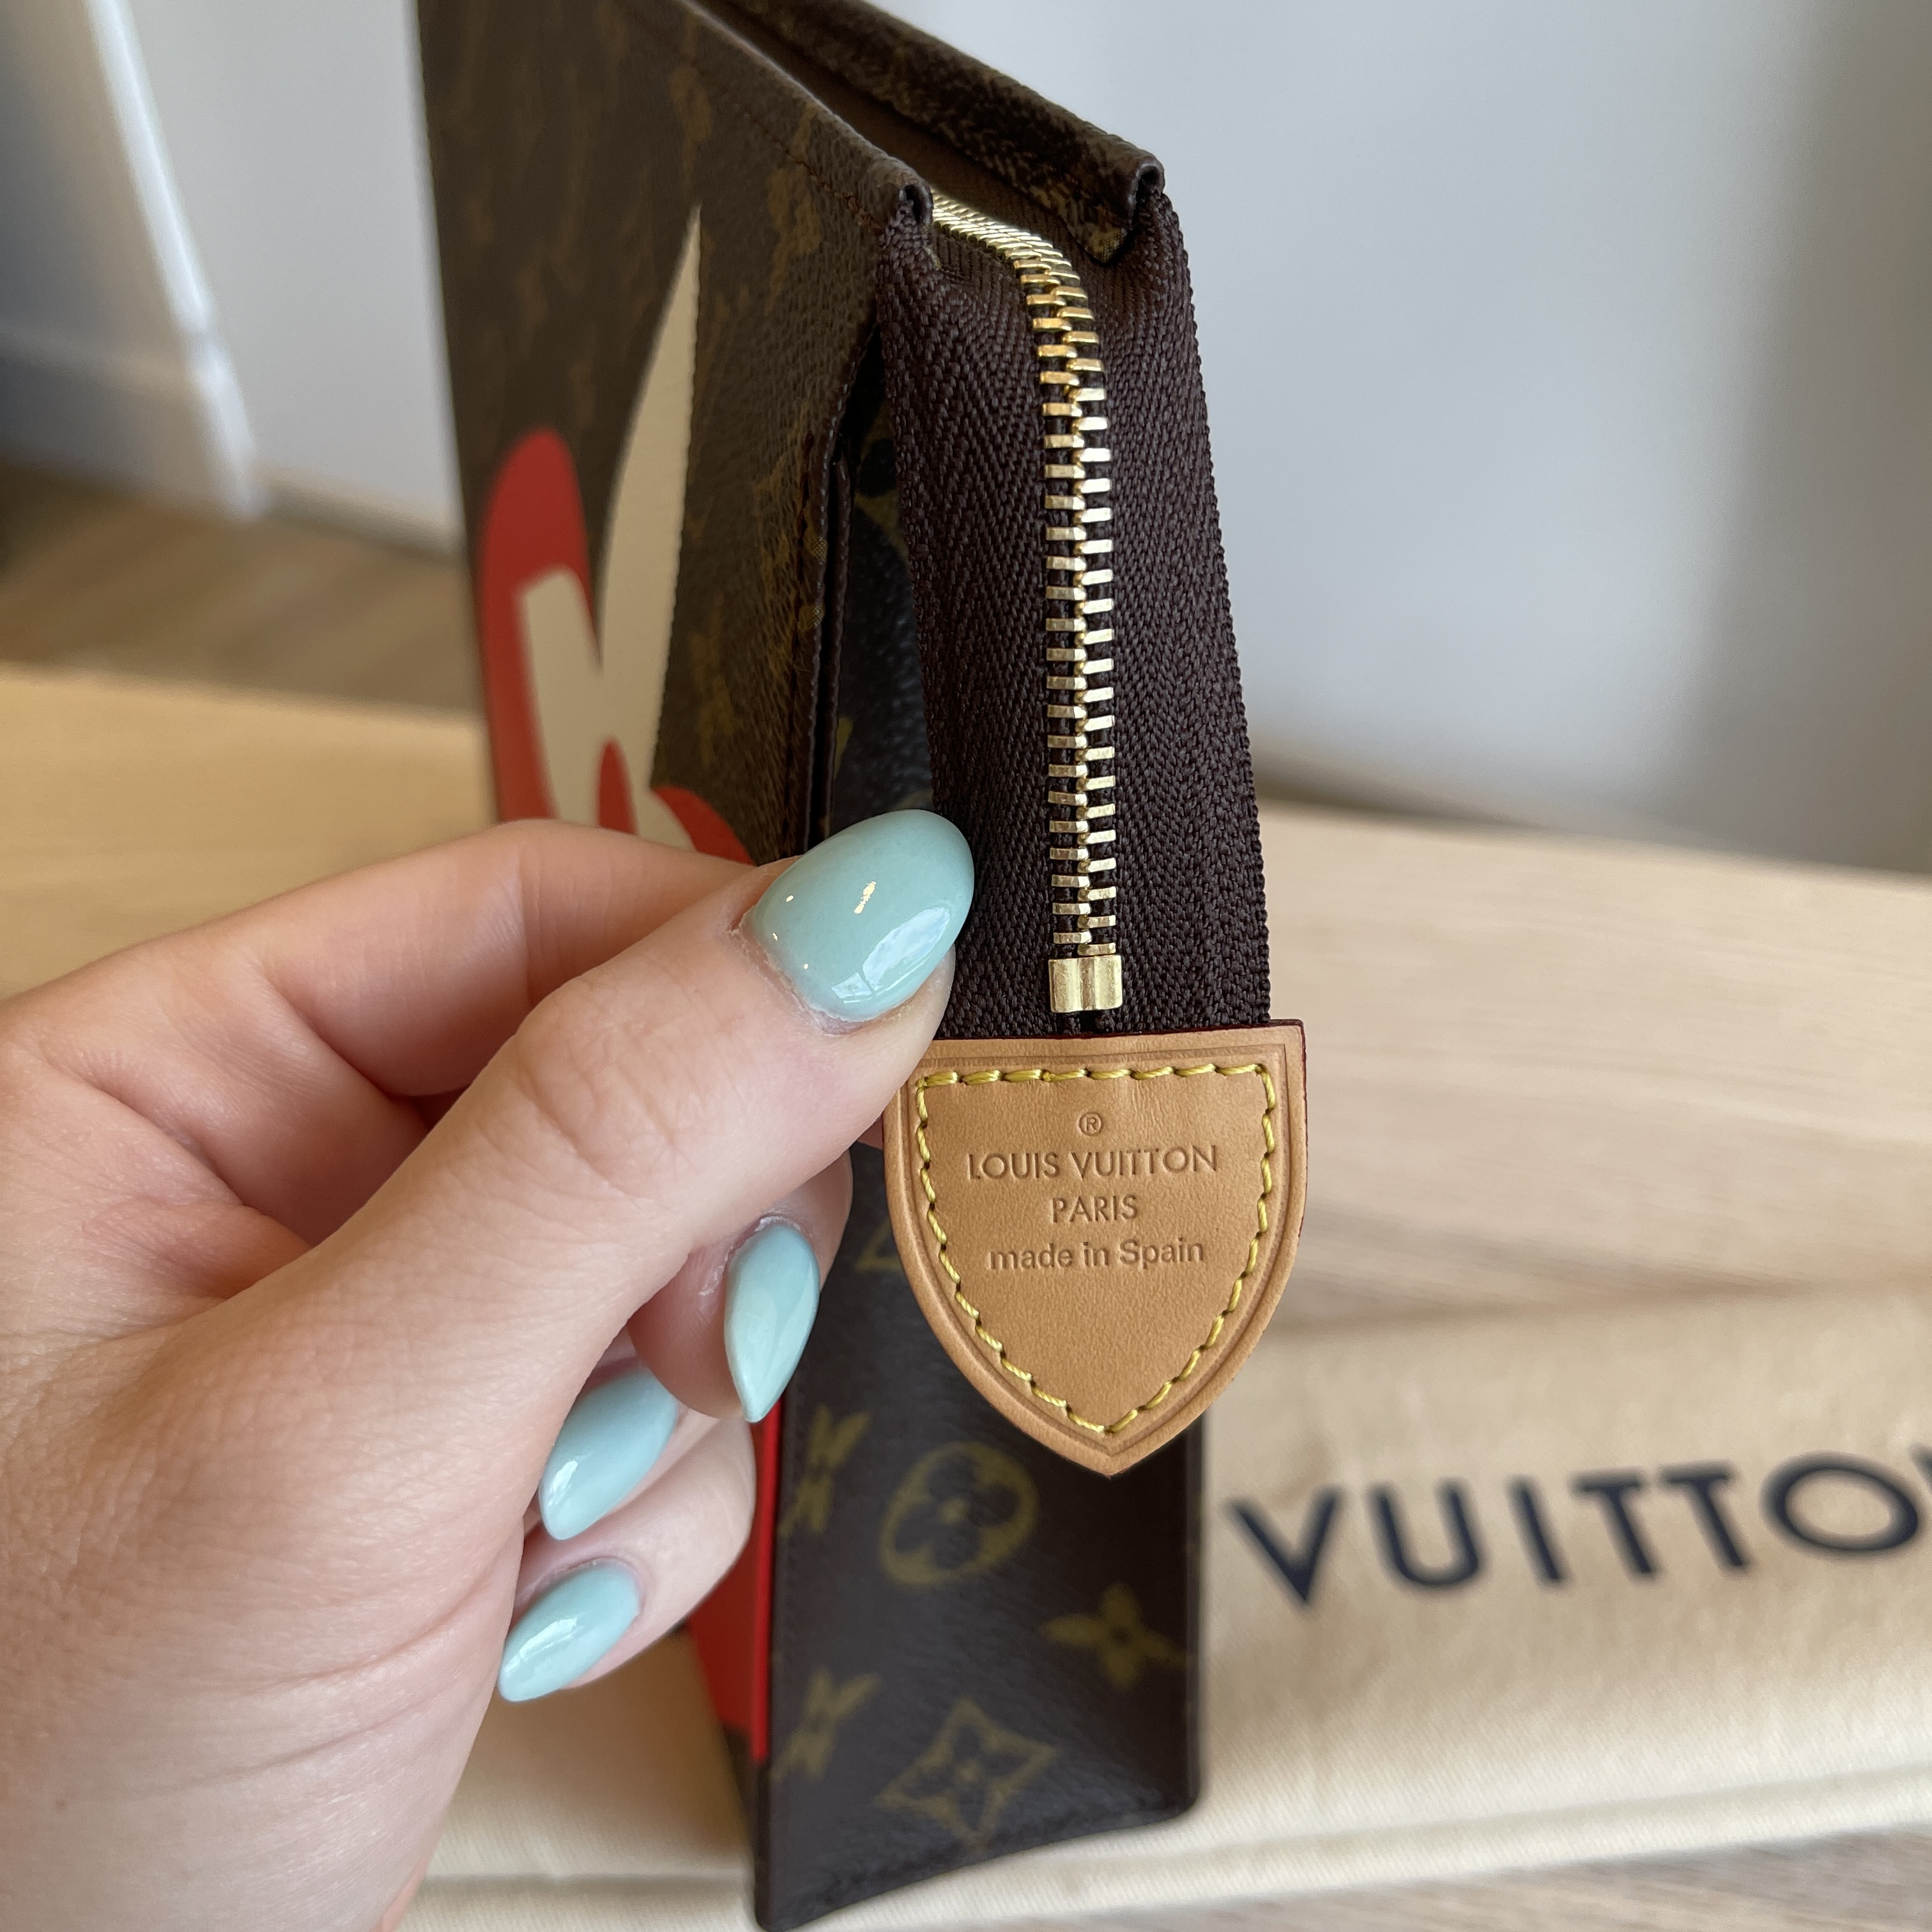 Toiletry 26 Remake - Black sides with card slots inside. My CA mentioned  it's orderable atm. : r/Louisvuitton